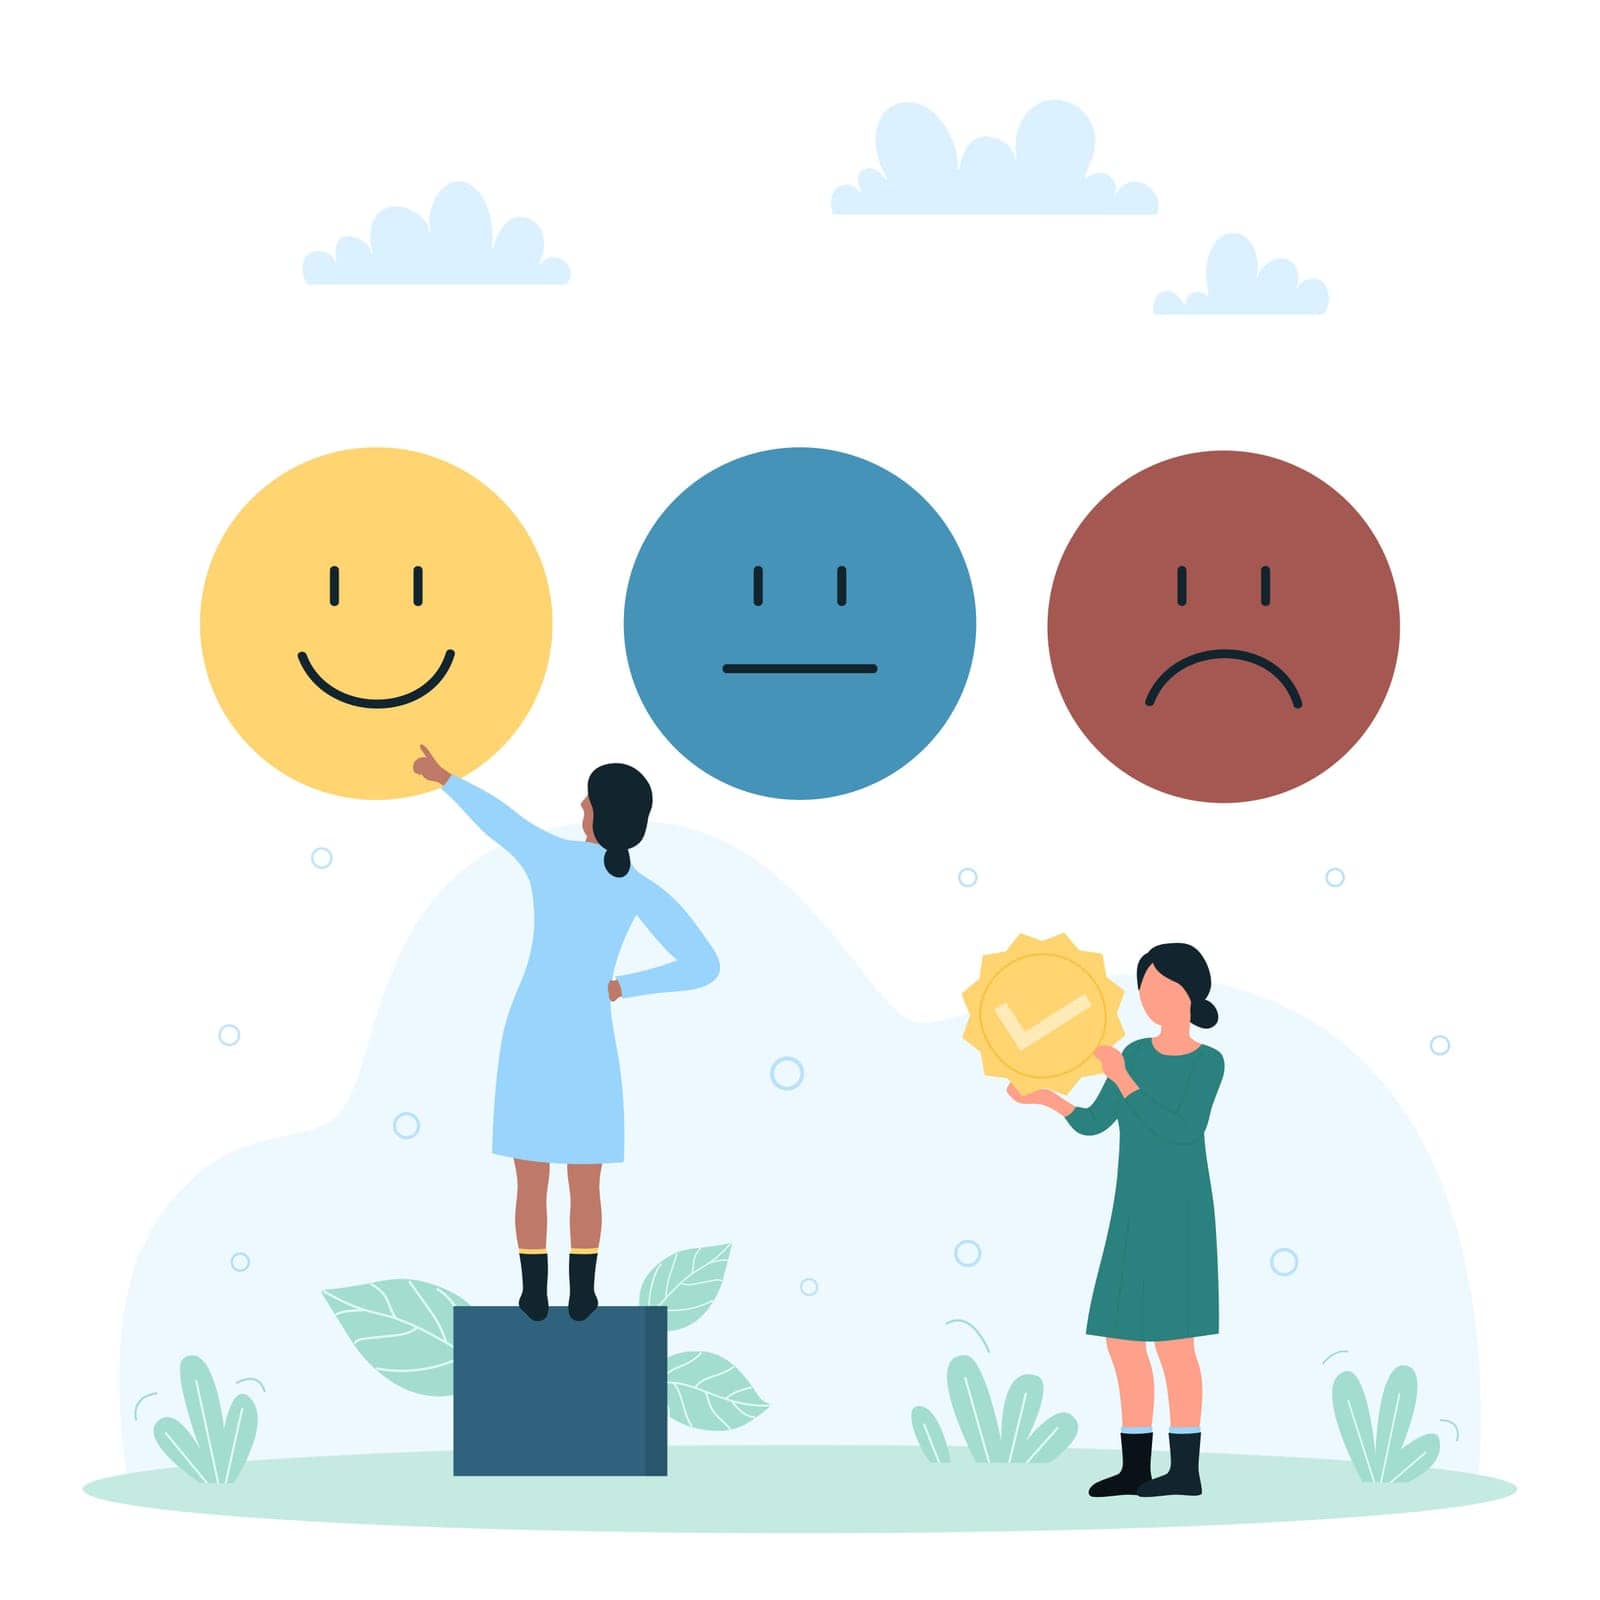 Customers survey with emoji of experience, tiny people choose happy face emoticon by Popov